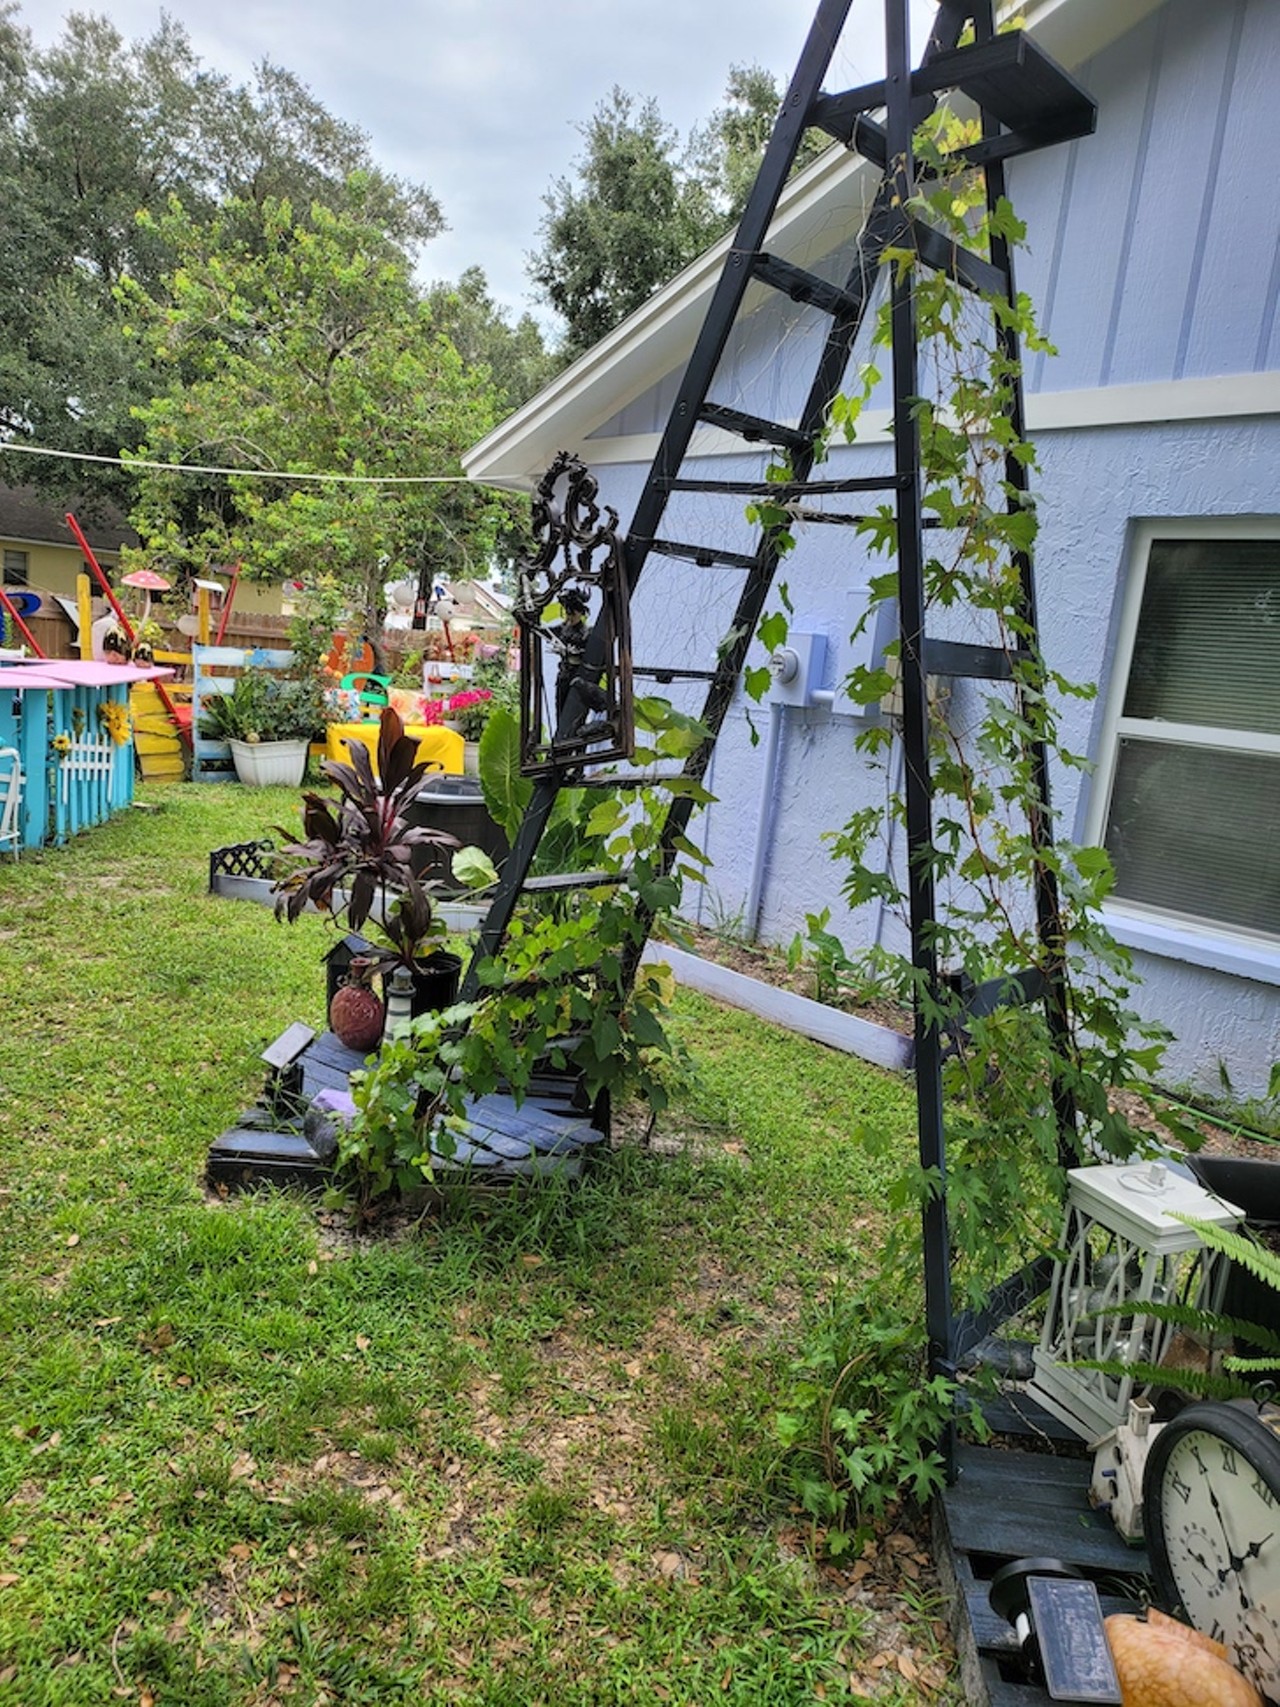 PHOTOS: The 'Edward Scissorhands' House in Lutz is now a free museum